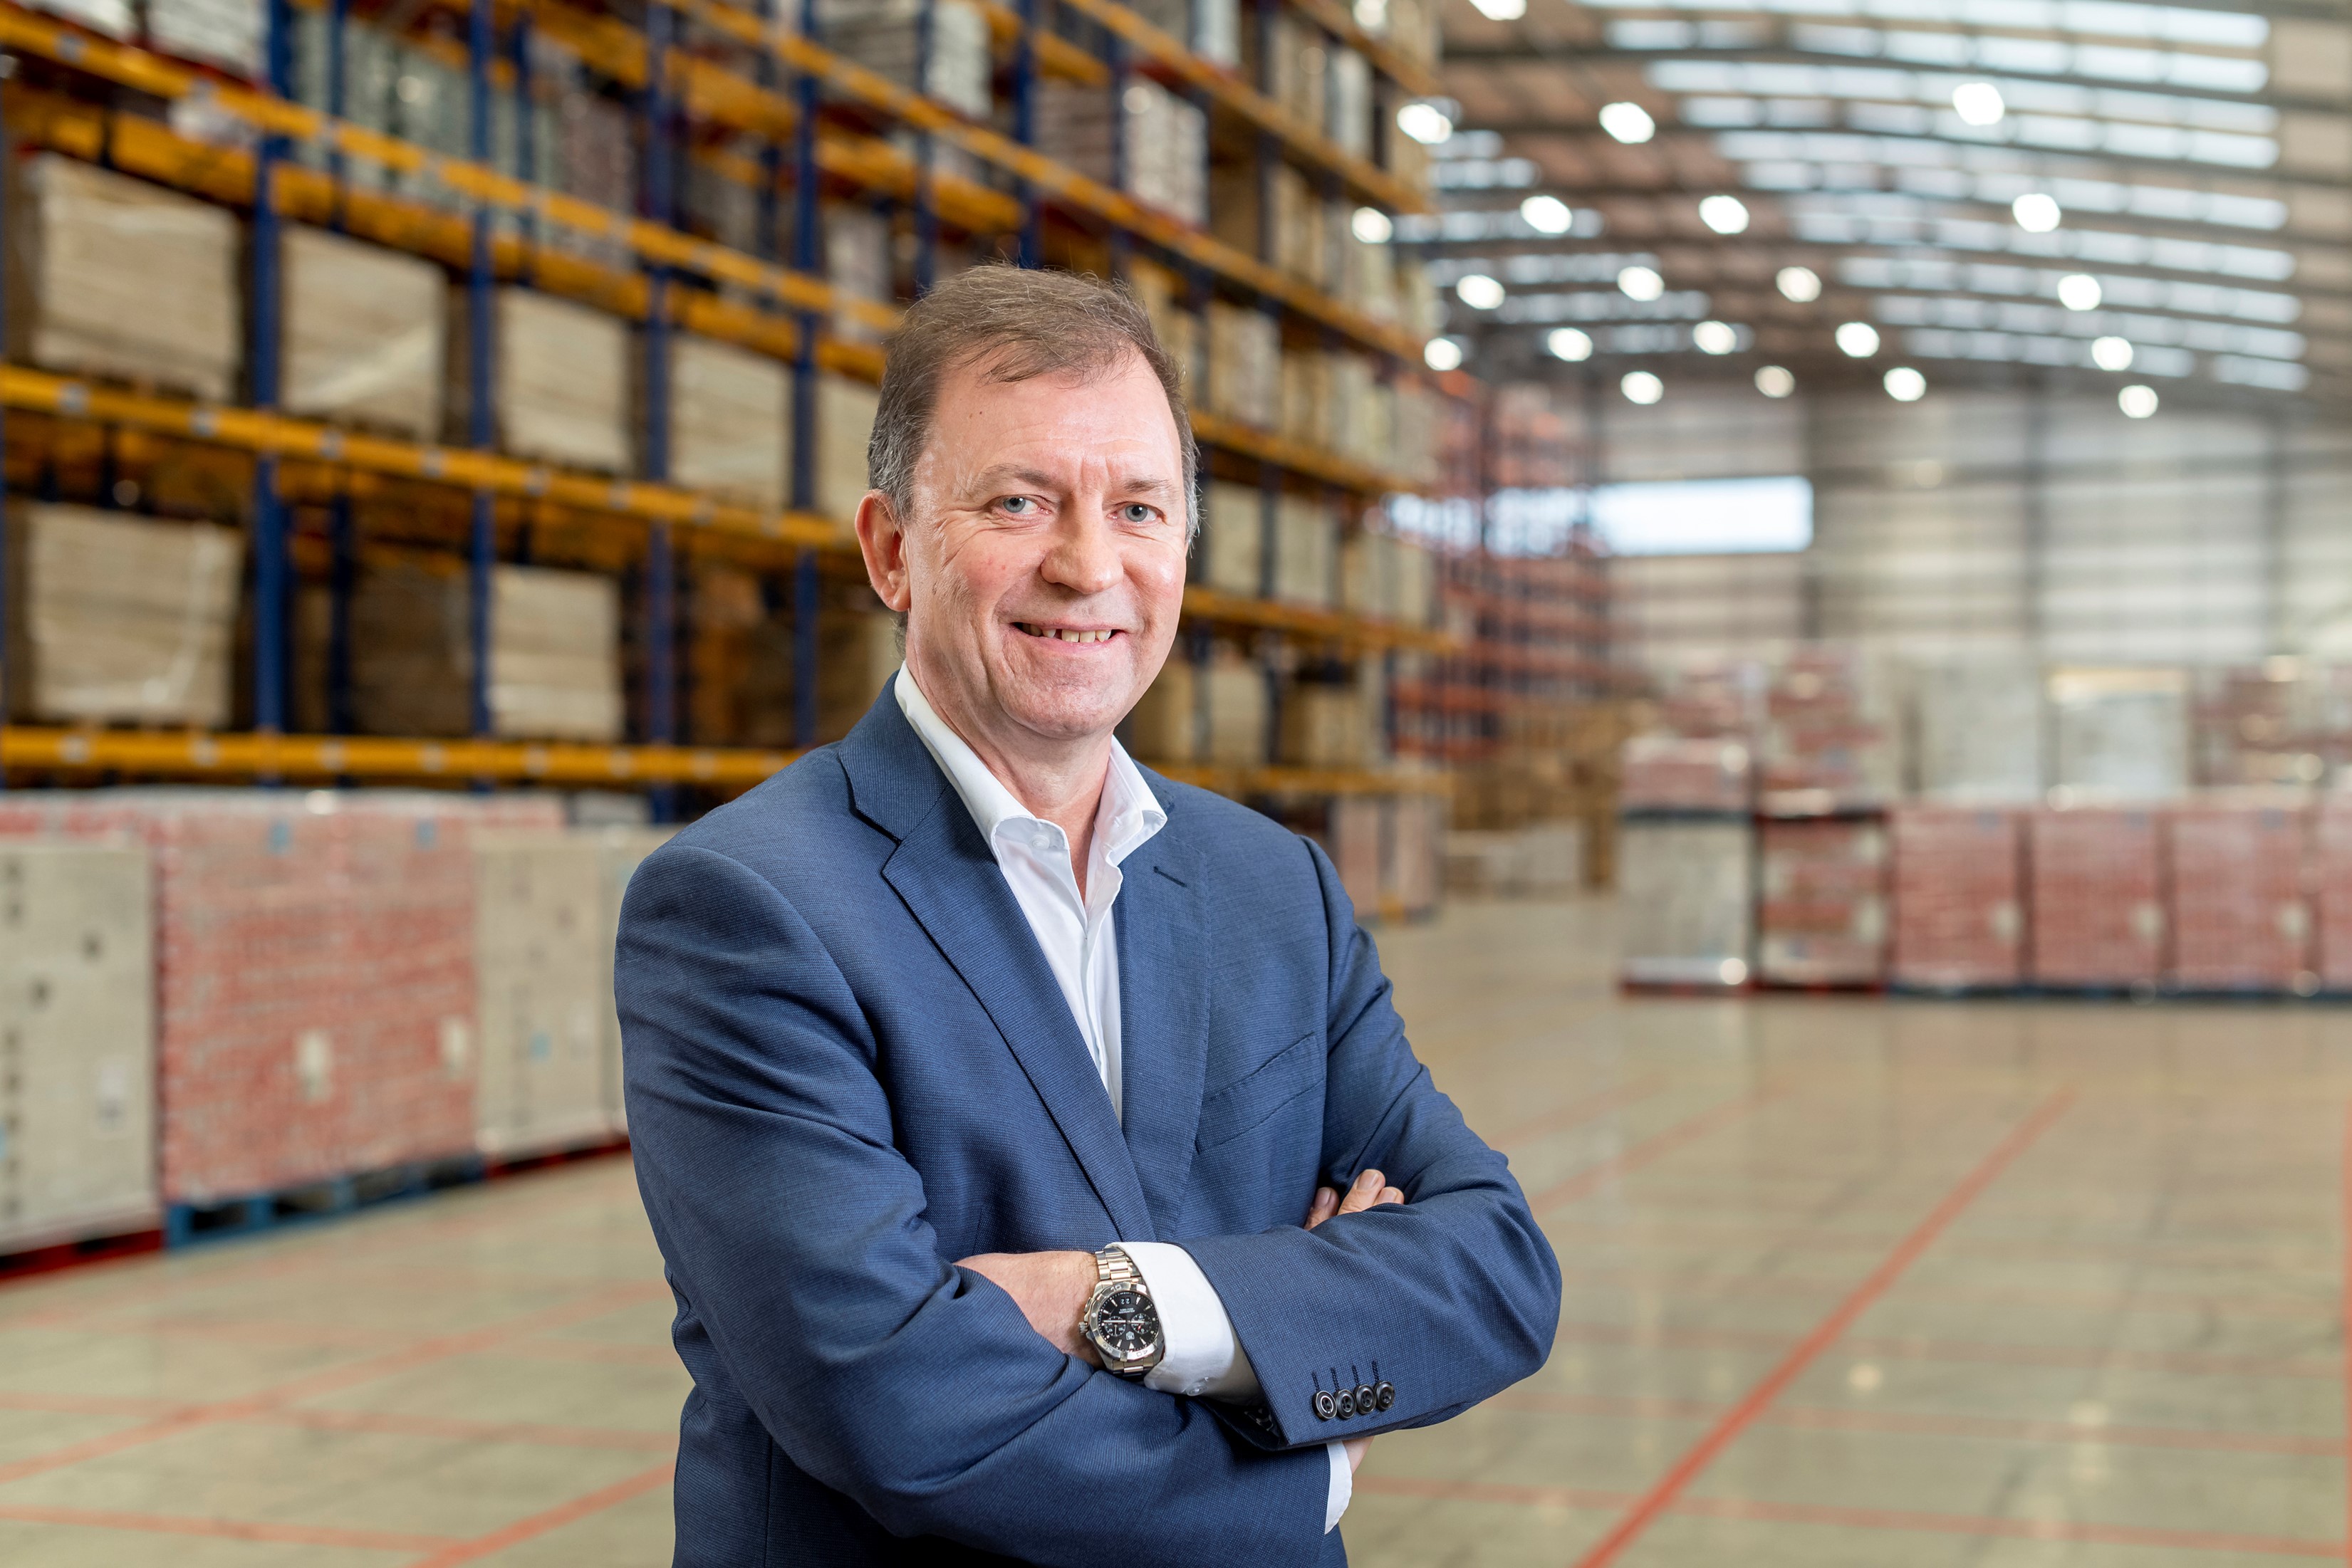 CHIEF EXECUTIVE SIMON HOBBS APPOINTED TO BOARD OF LOGISTICS UK